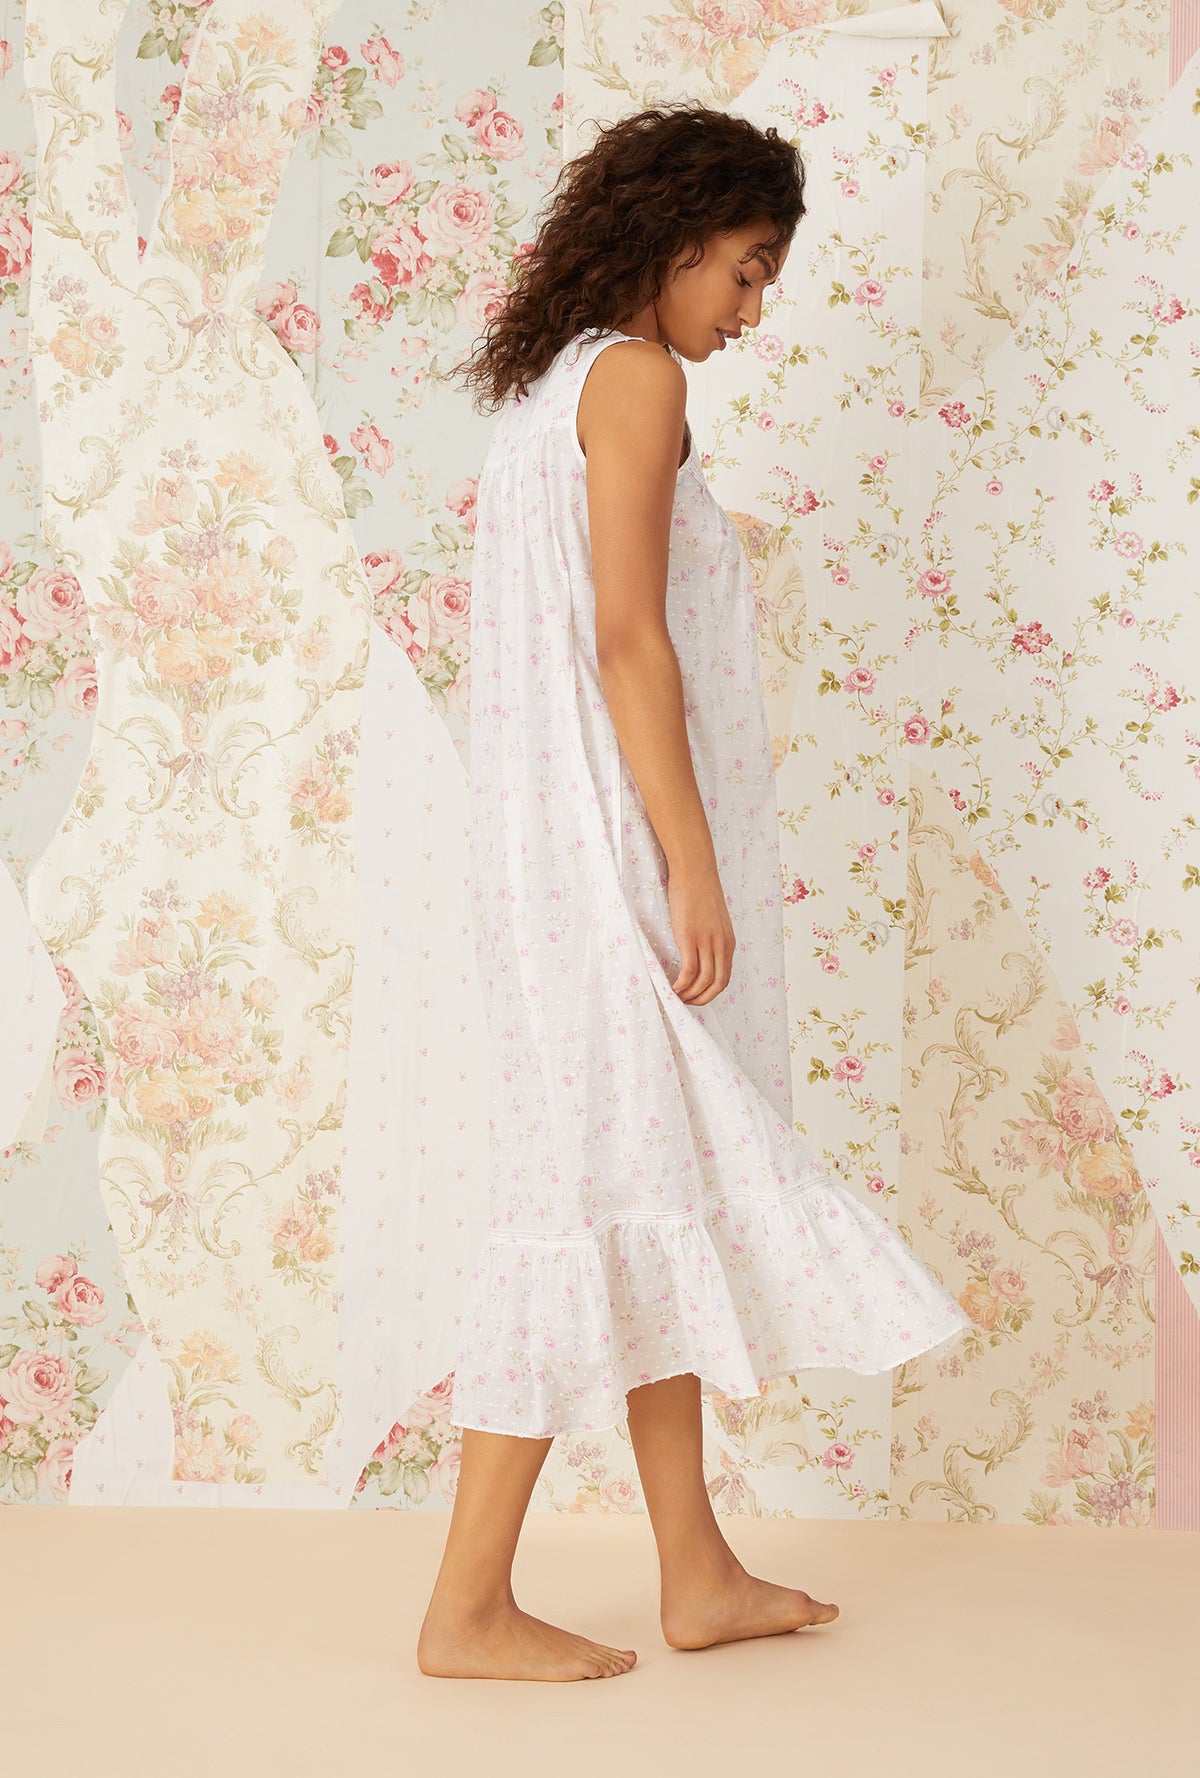 Lovely Floral Swiss Dot Ballet Nightgown